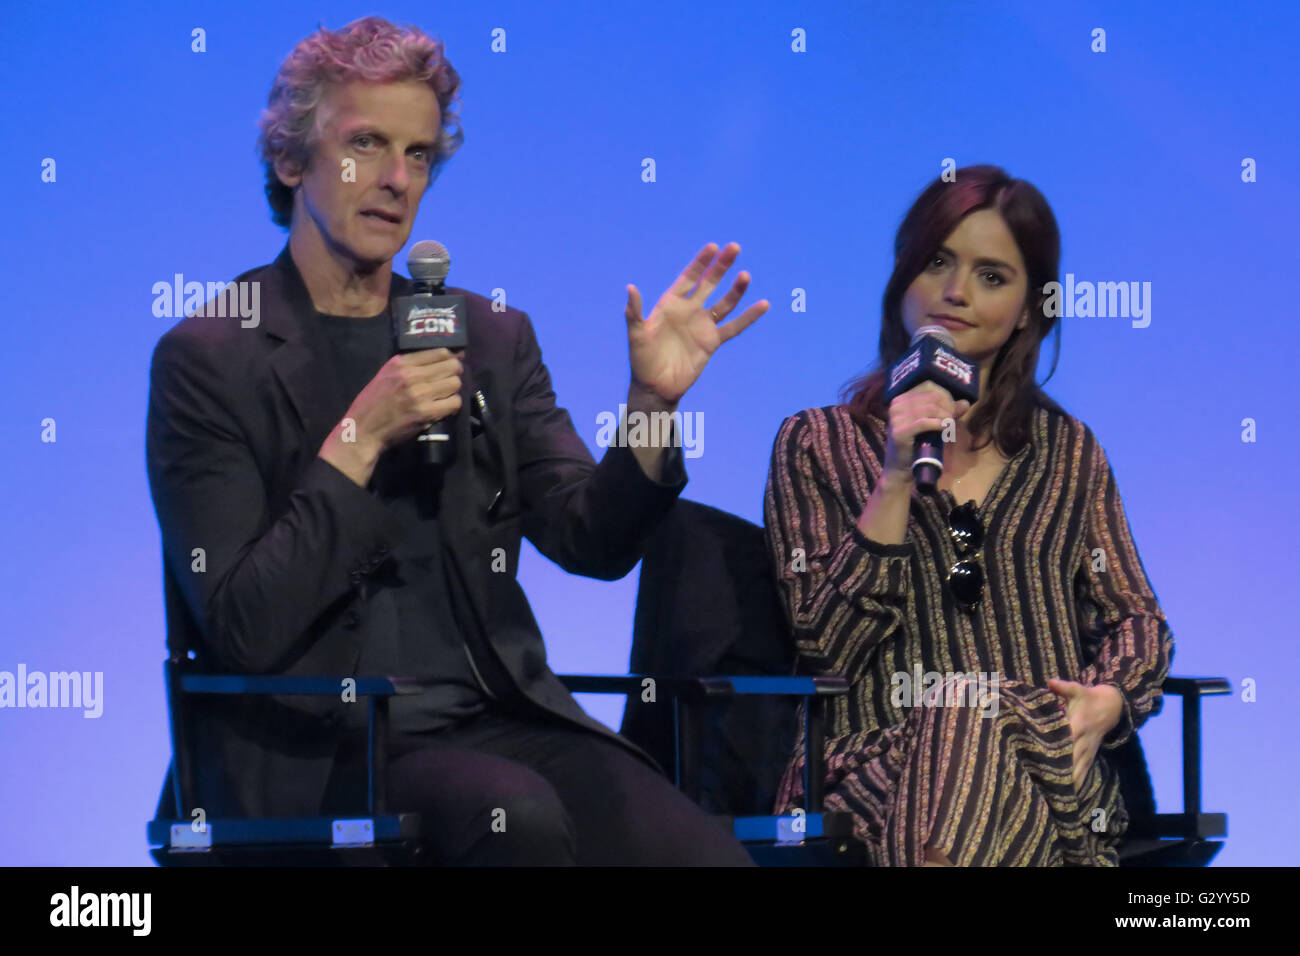 Washington, DC, USA. 5th June, 2016. Doctor Who's Peter Capaldi (the Twelfth Doctor) answering a question as Jenna-Louise Coleman (Clara Oswald) listens at Awesome Con 2016, held in Washington, DC. Credit:  Evan Golub/ZUMA Wire/Alamy Live News Stock Photo